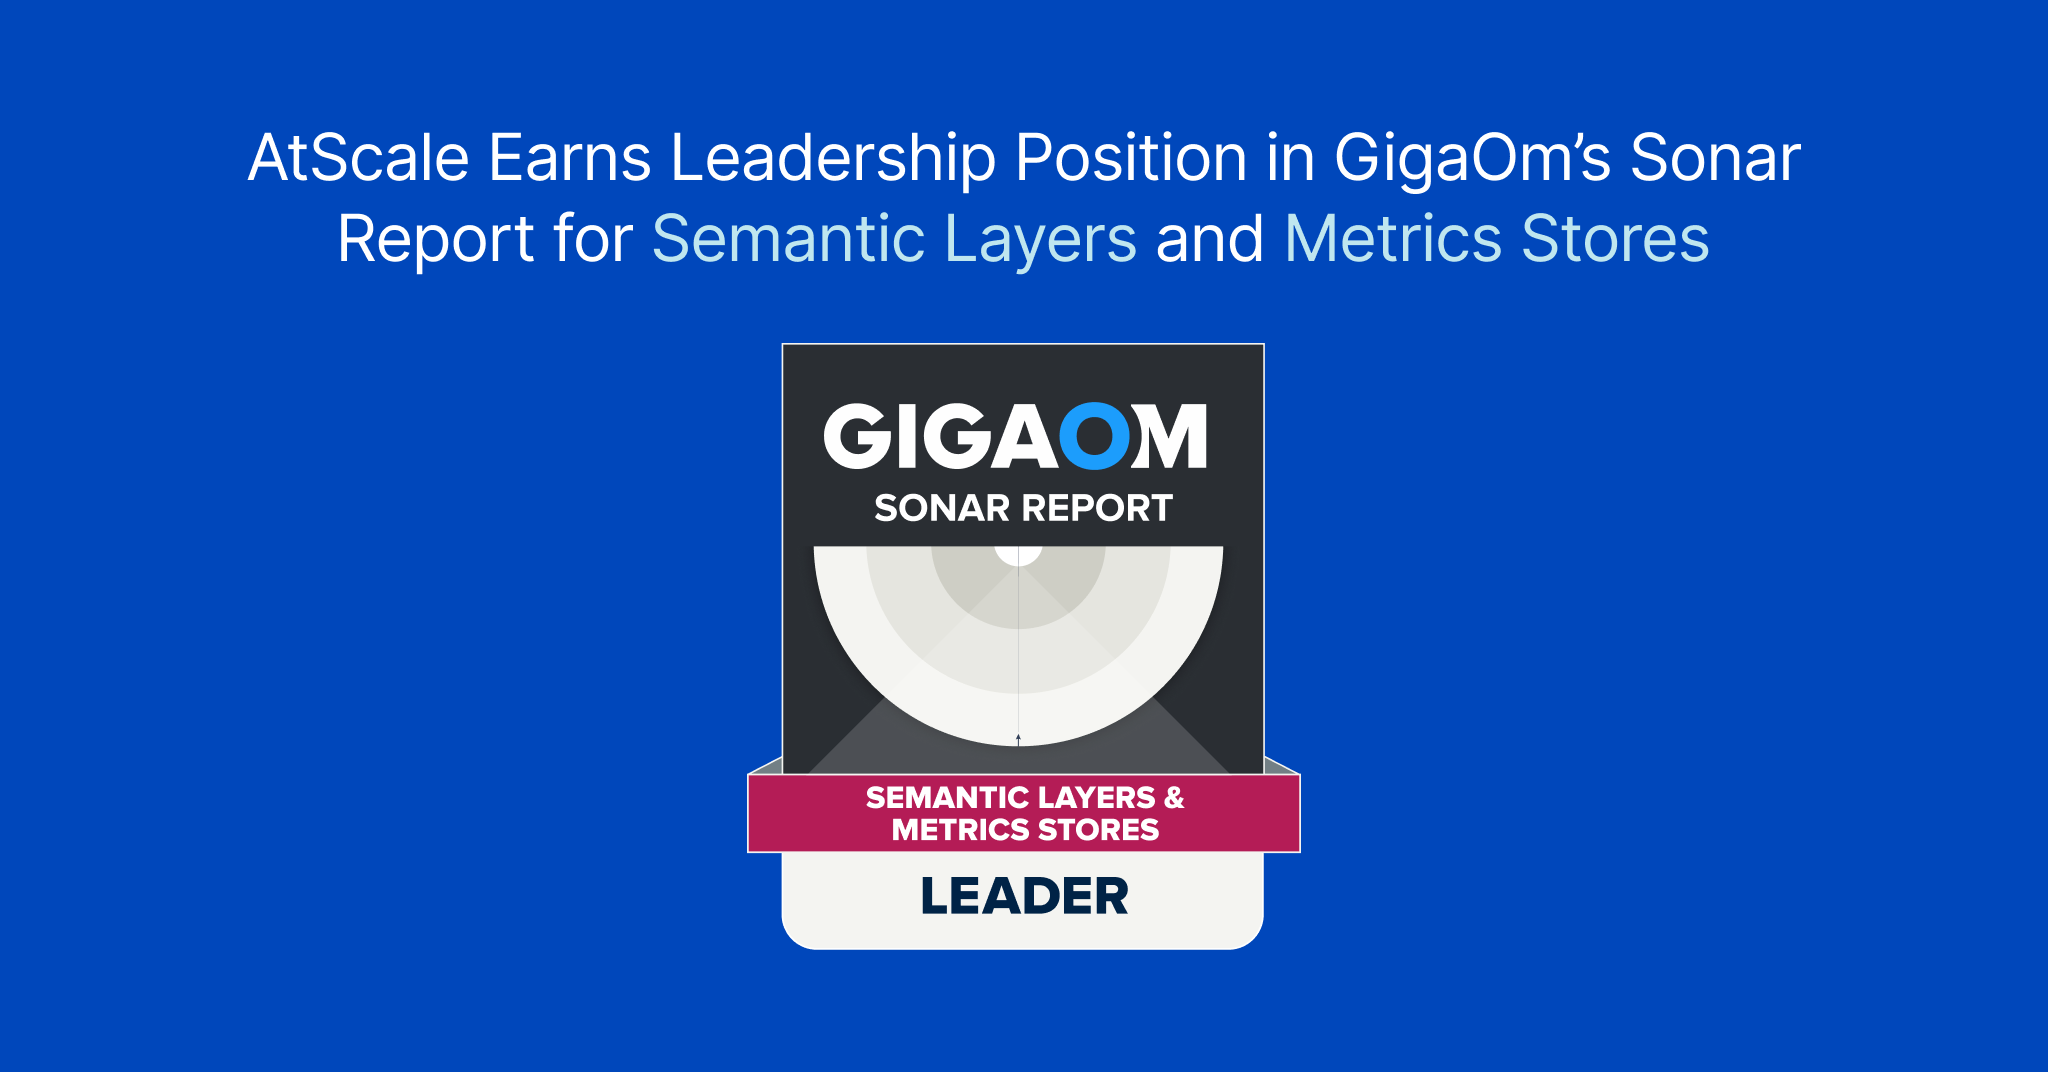 AtScale Earns Leadership Position in GigaOm’s Sonar Report for Semantic Layers and Metrics Stores